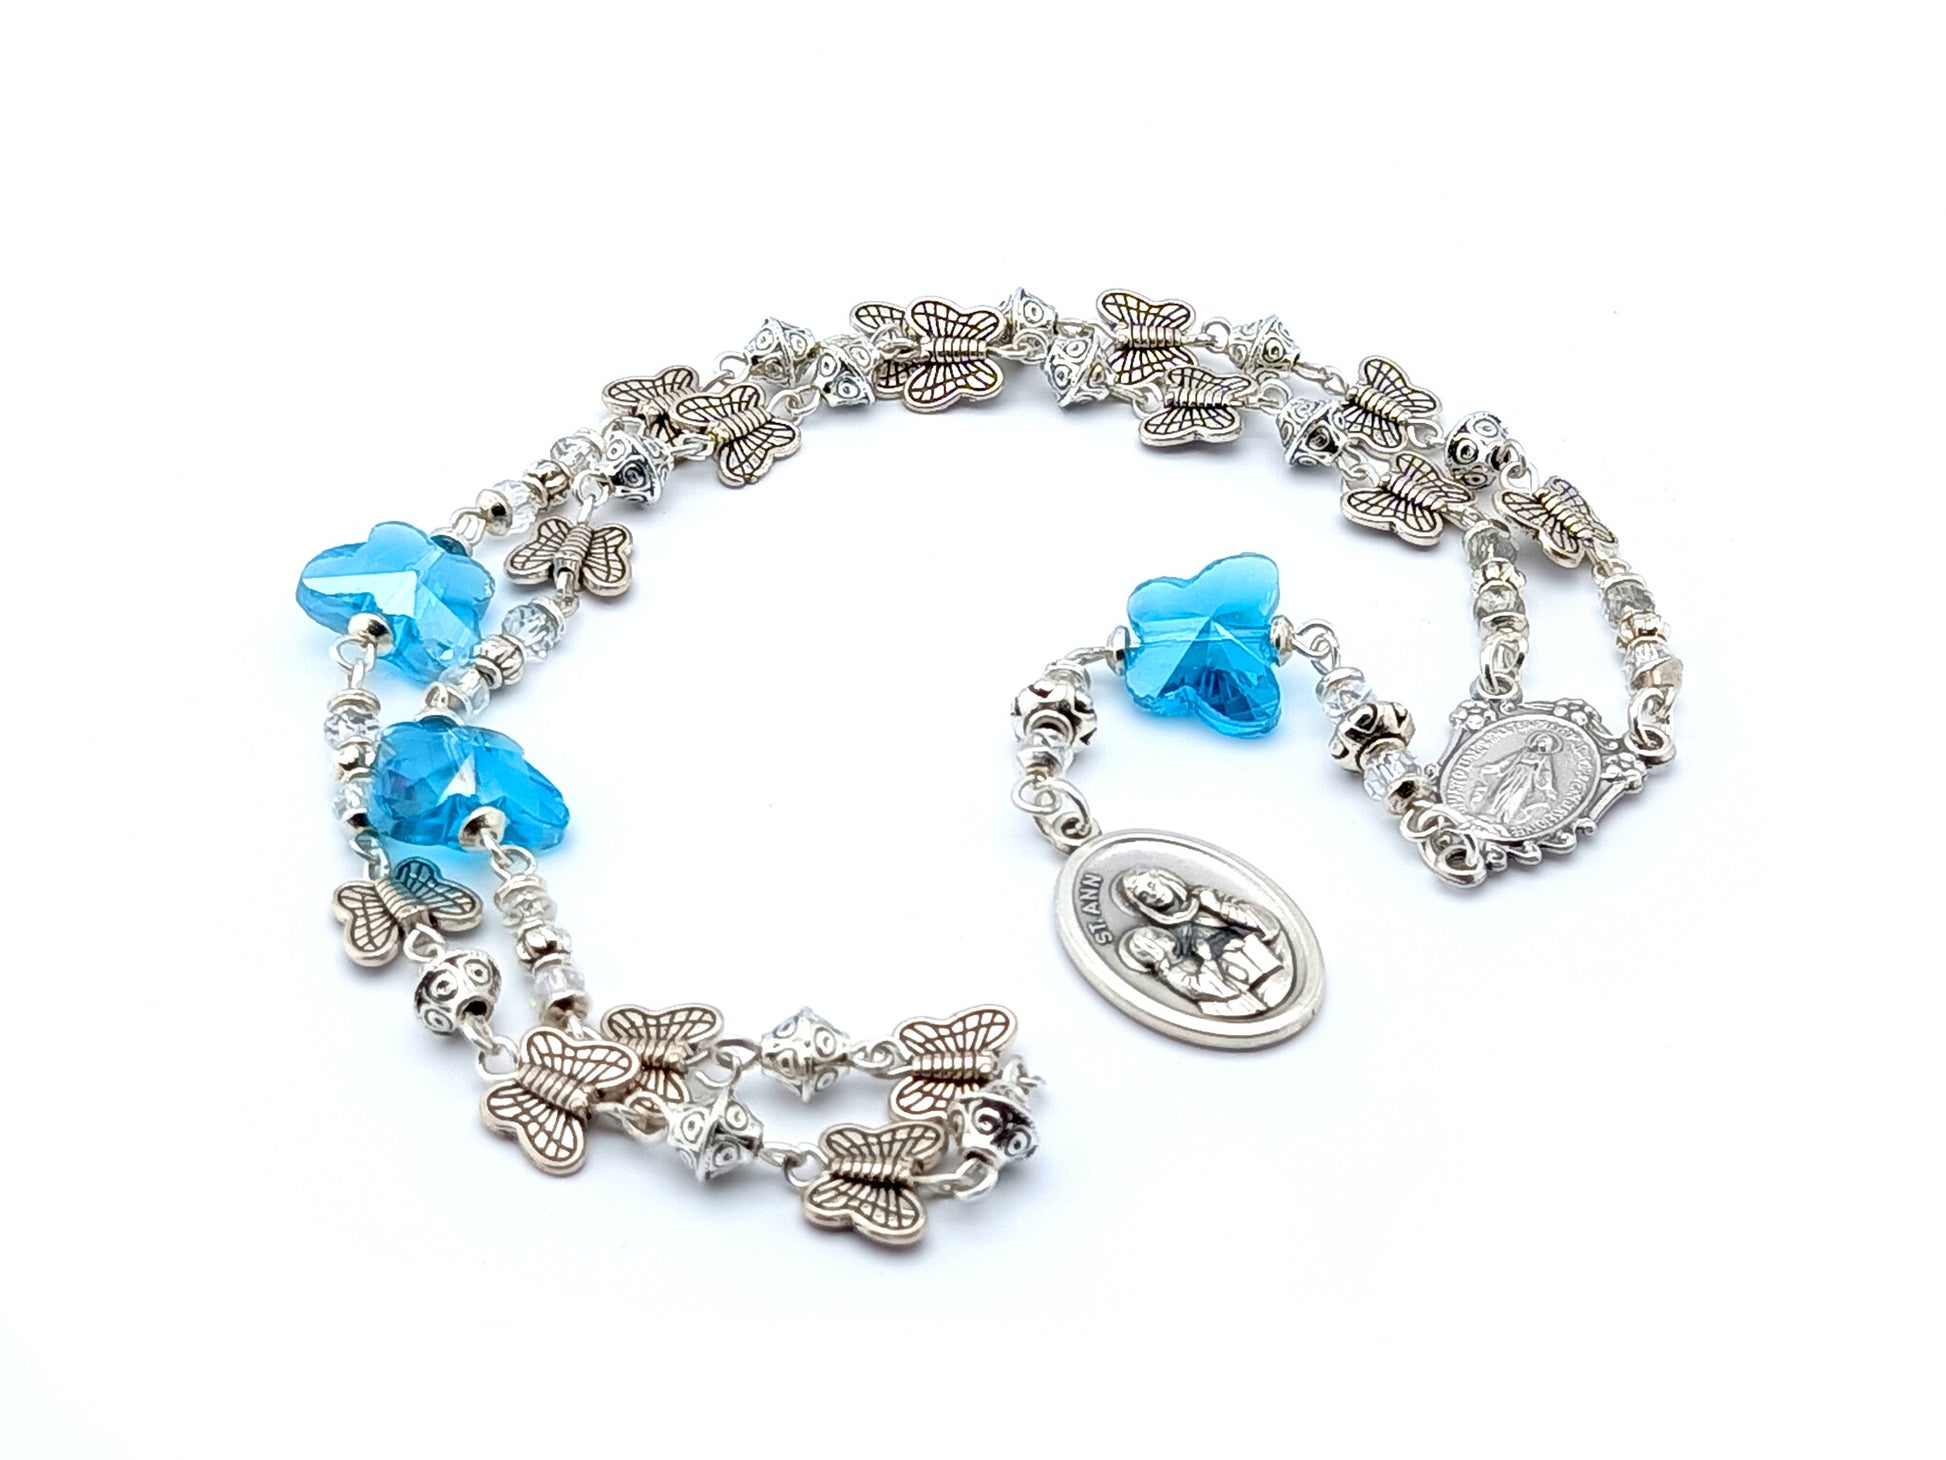 Saint Ann unique rosary beads prayer chaplet with silver butterfly and blue crystal beads, Miraculous medal centre and  Saint Ann end medal.